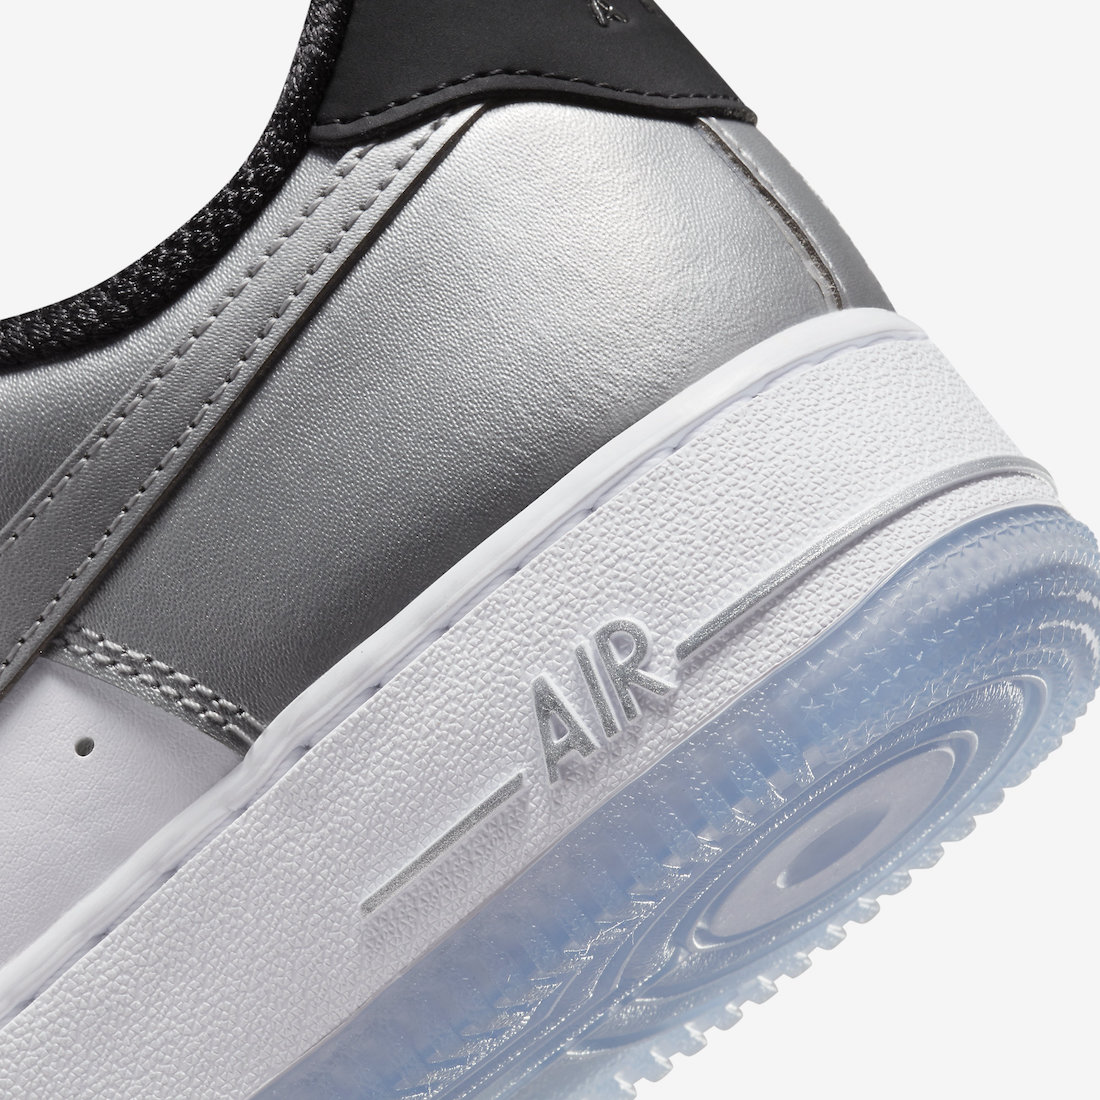 Nike Air Force 1 Low Chrome Metallic Silver DX6764-001 Release Date 